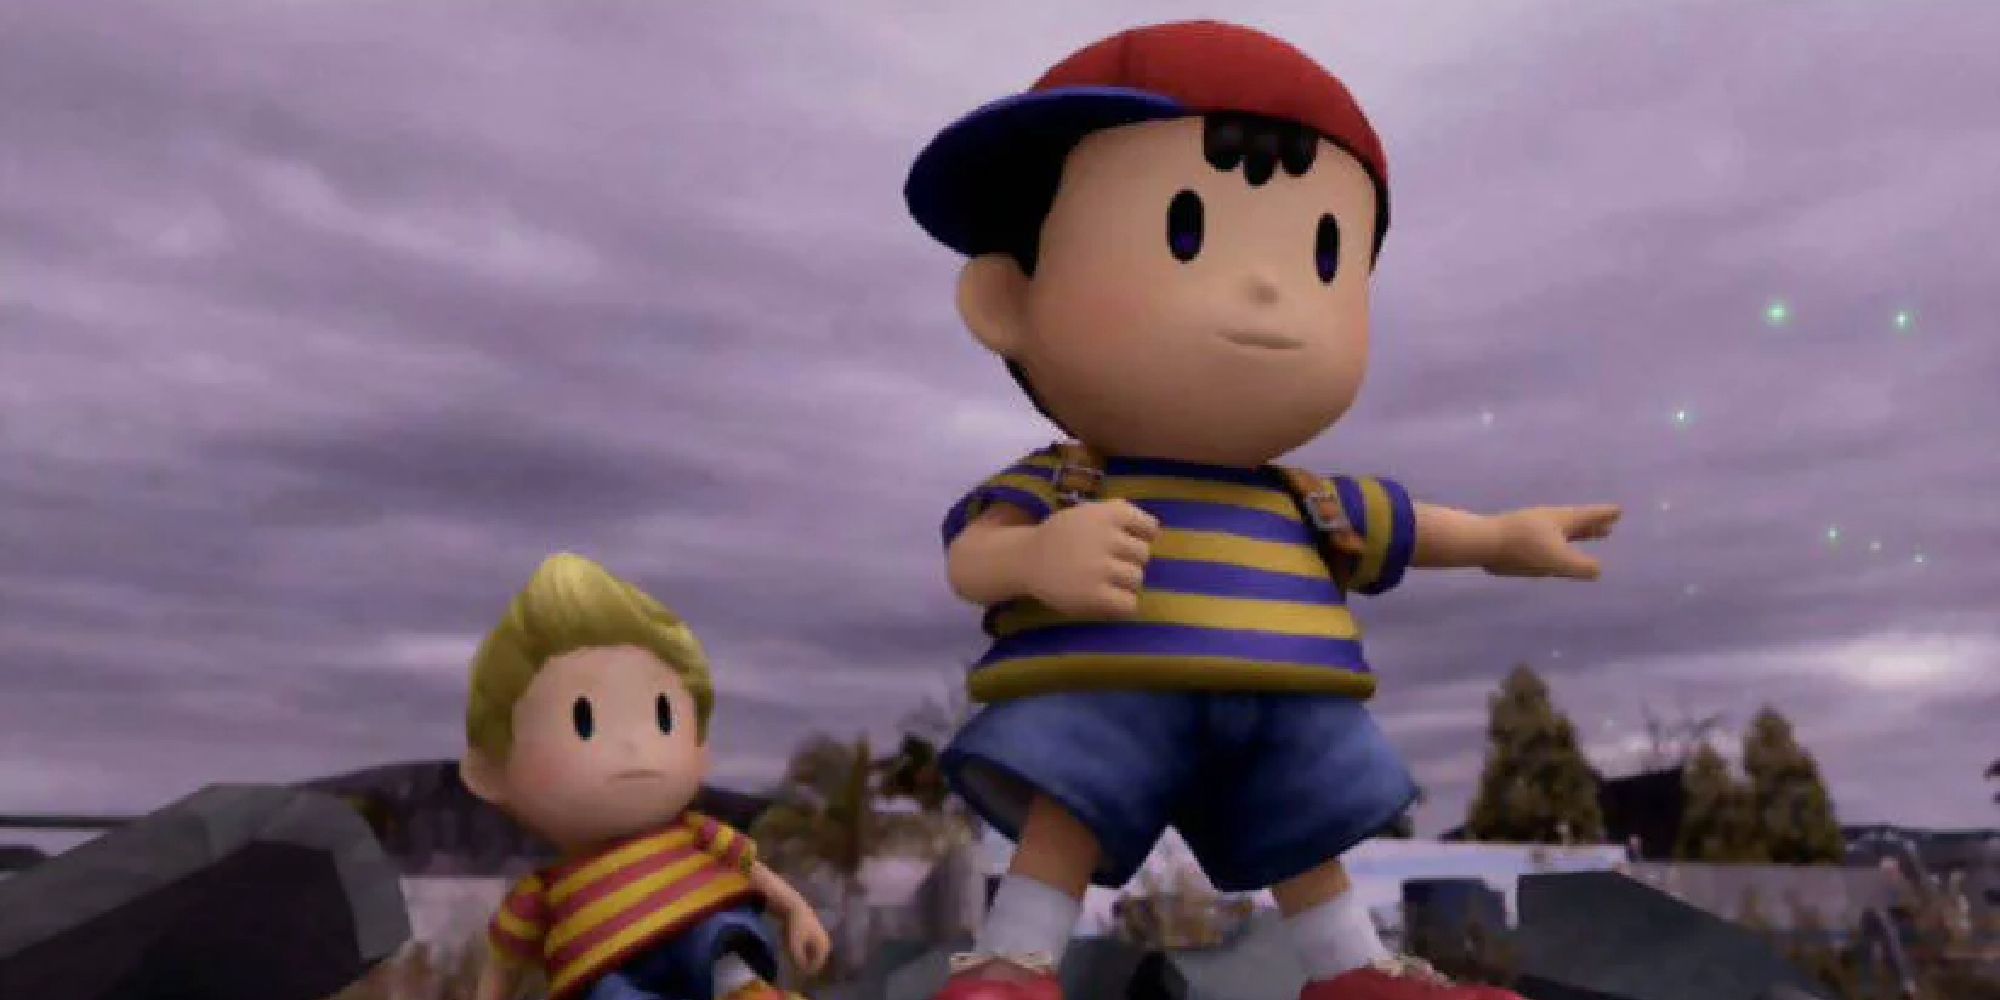 Ness rescuing Lucas in a cutscene from the Subspace Emissary in Smash Bros Brawl